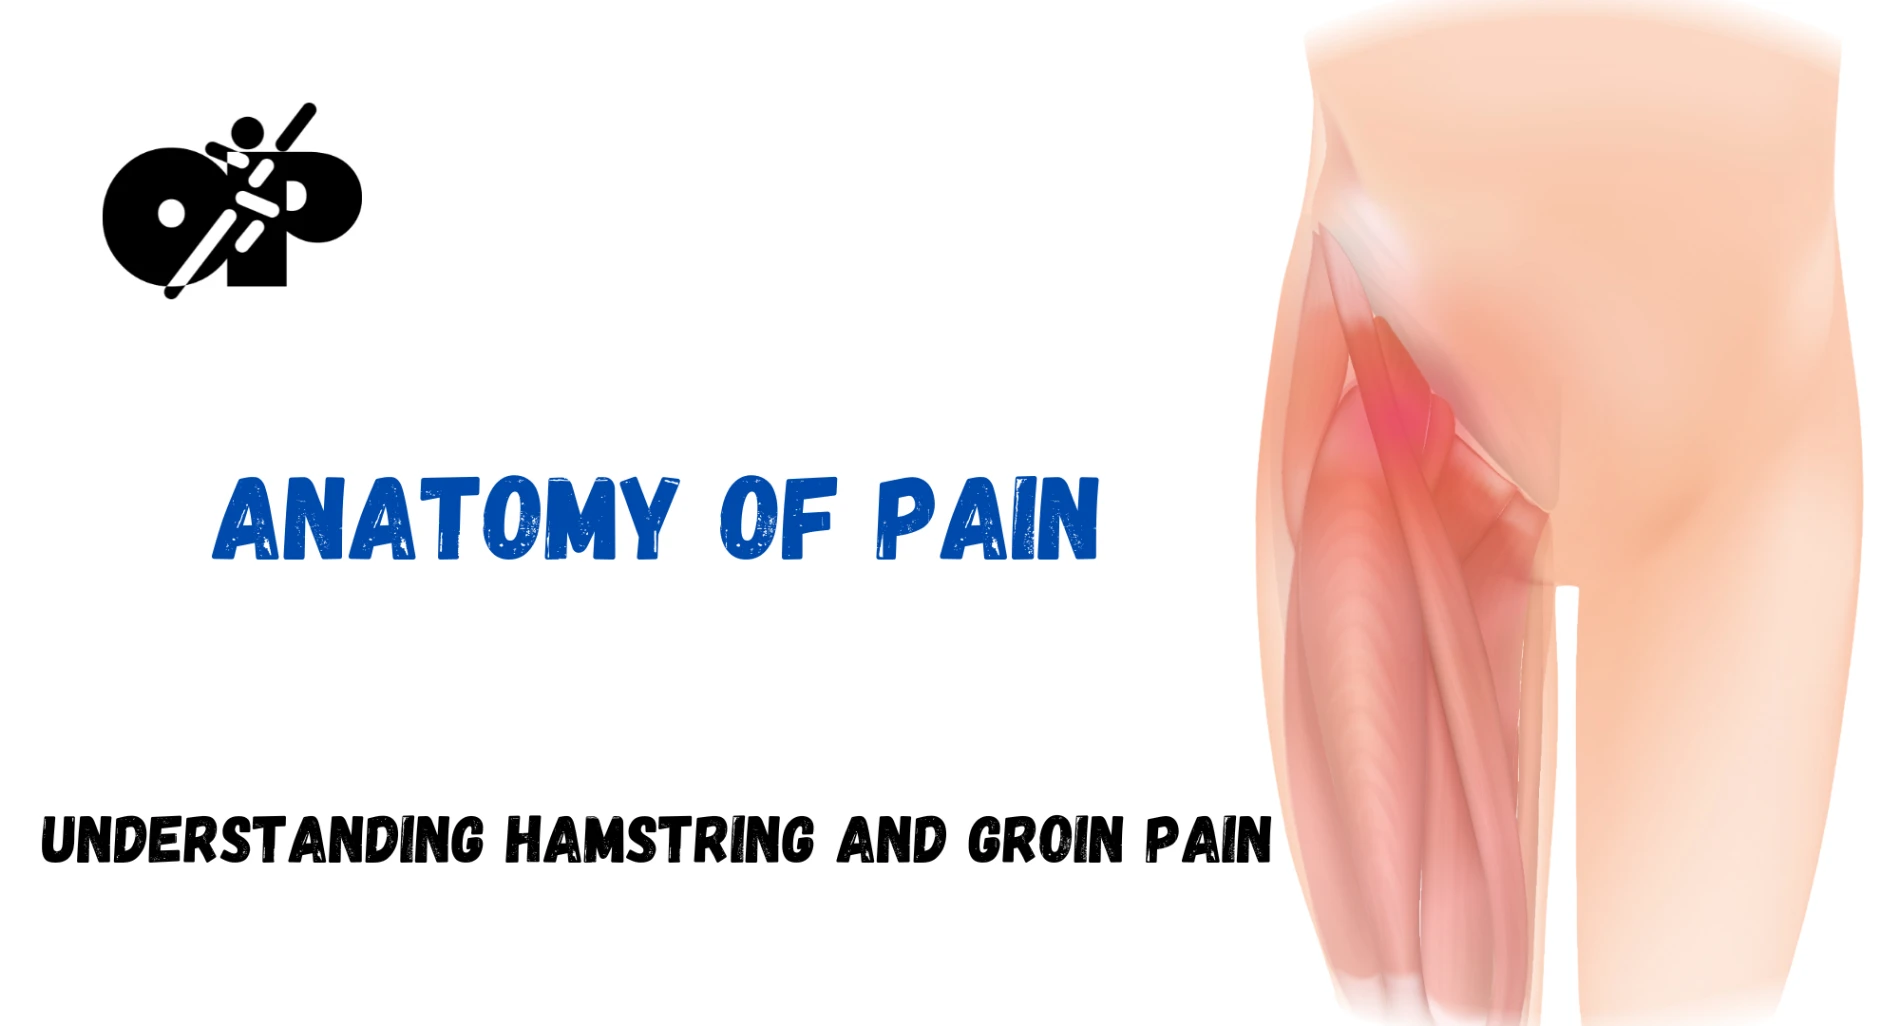 47. Anatomy of Pain - Understanding Hamstring and Groin Pain